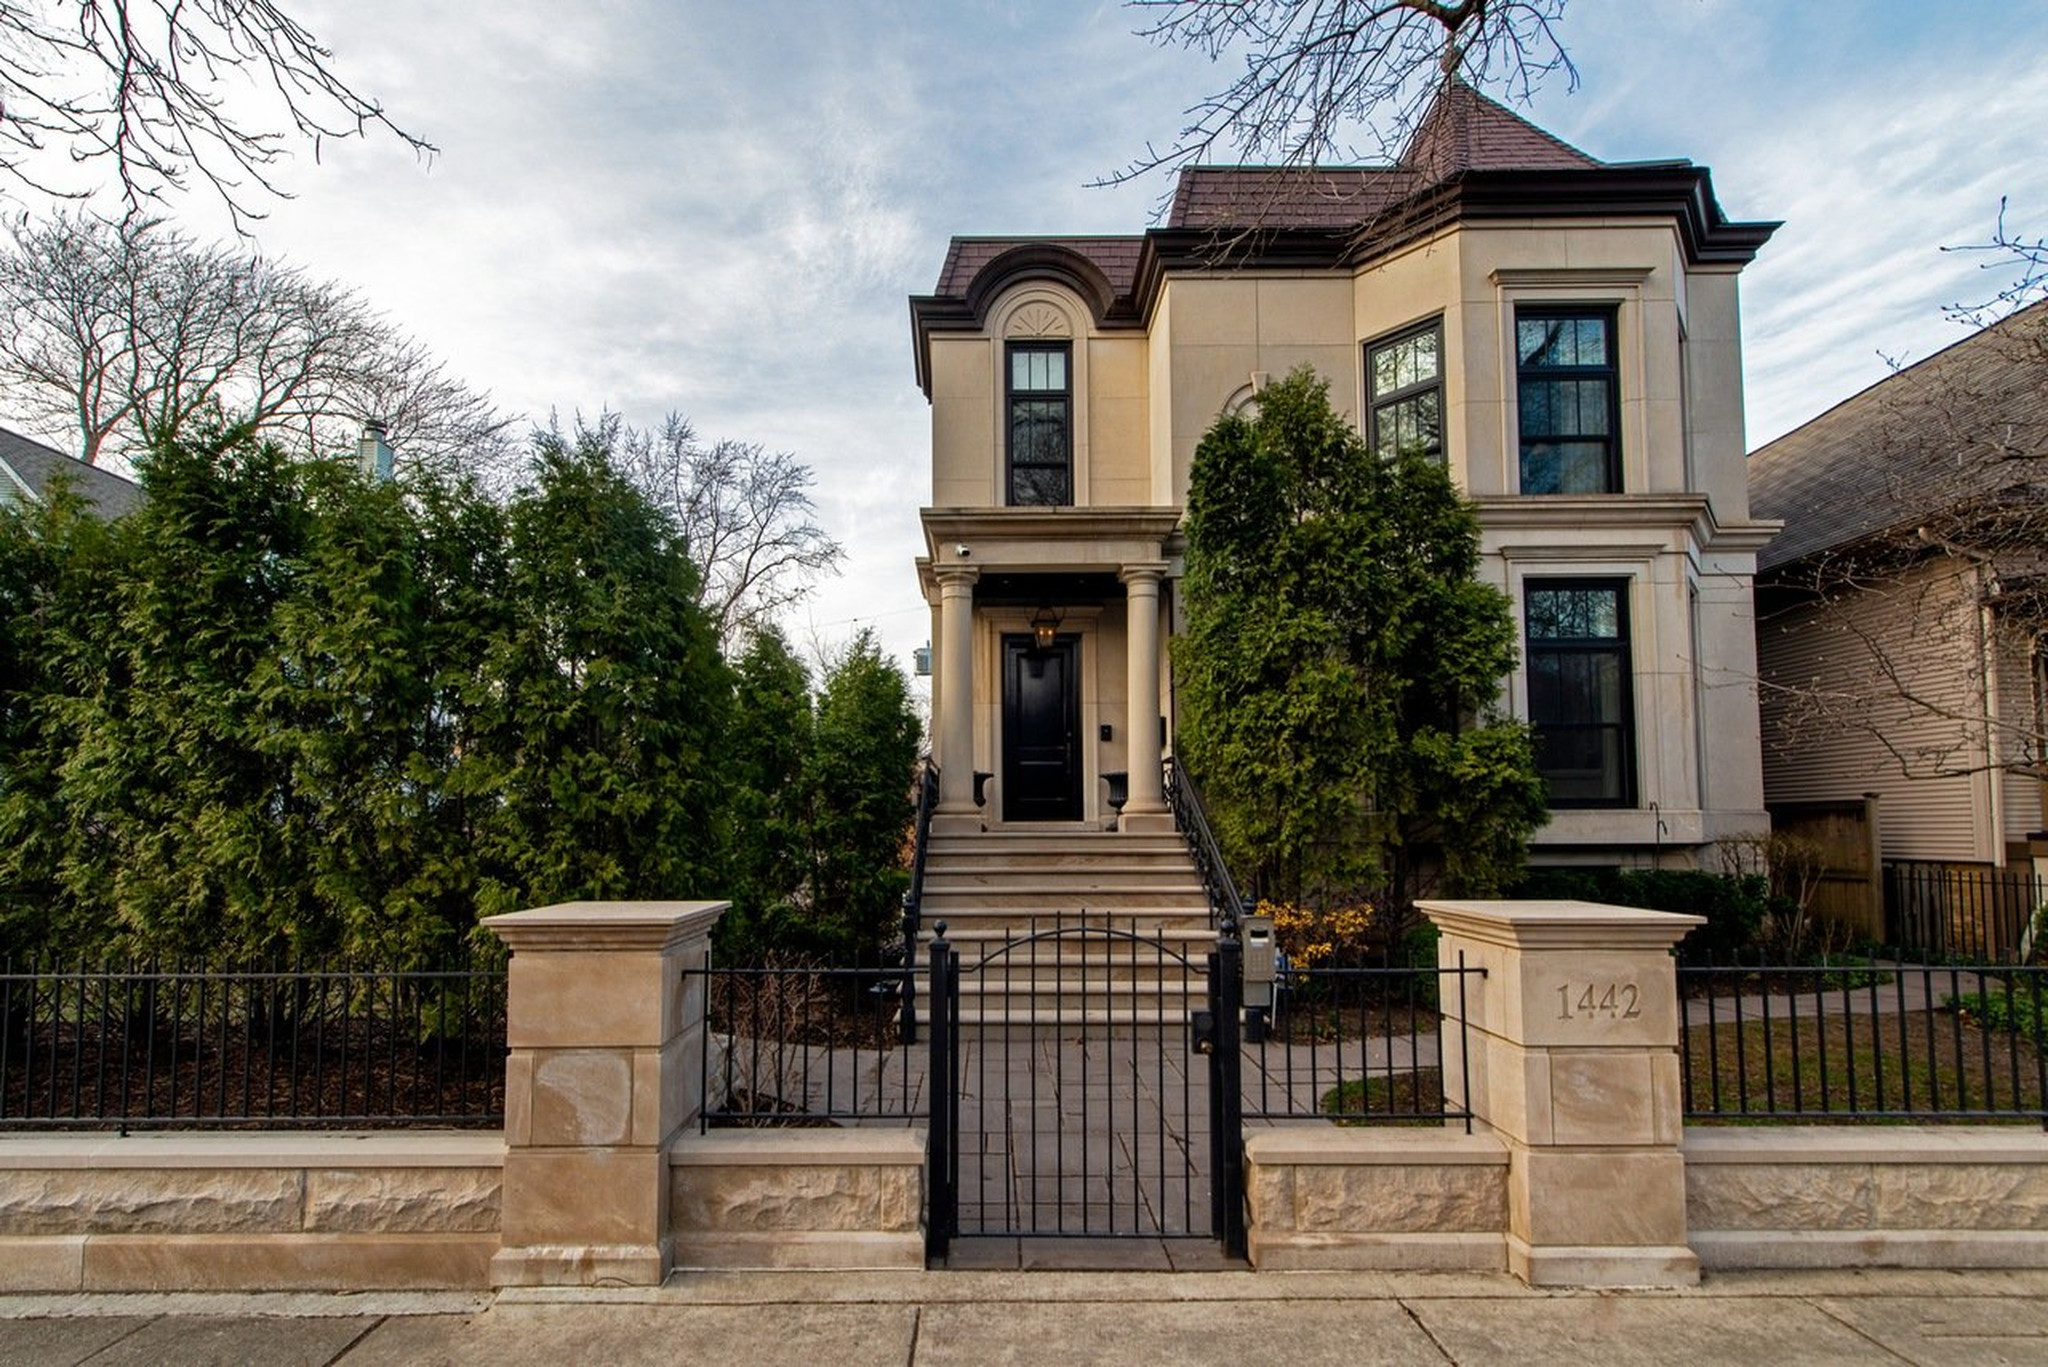 Former Chicago Cub Jon Lester lists his Graceland West home for $6M